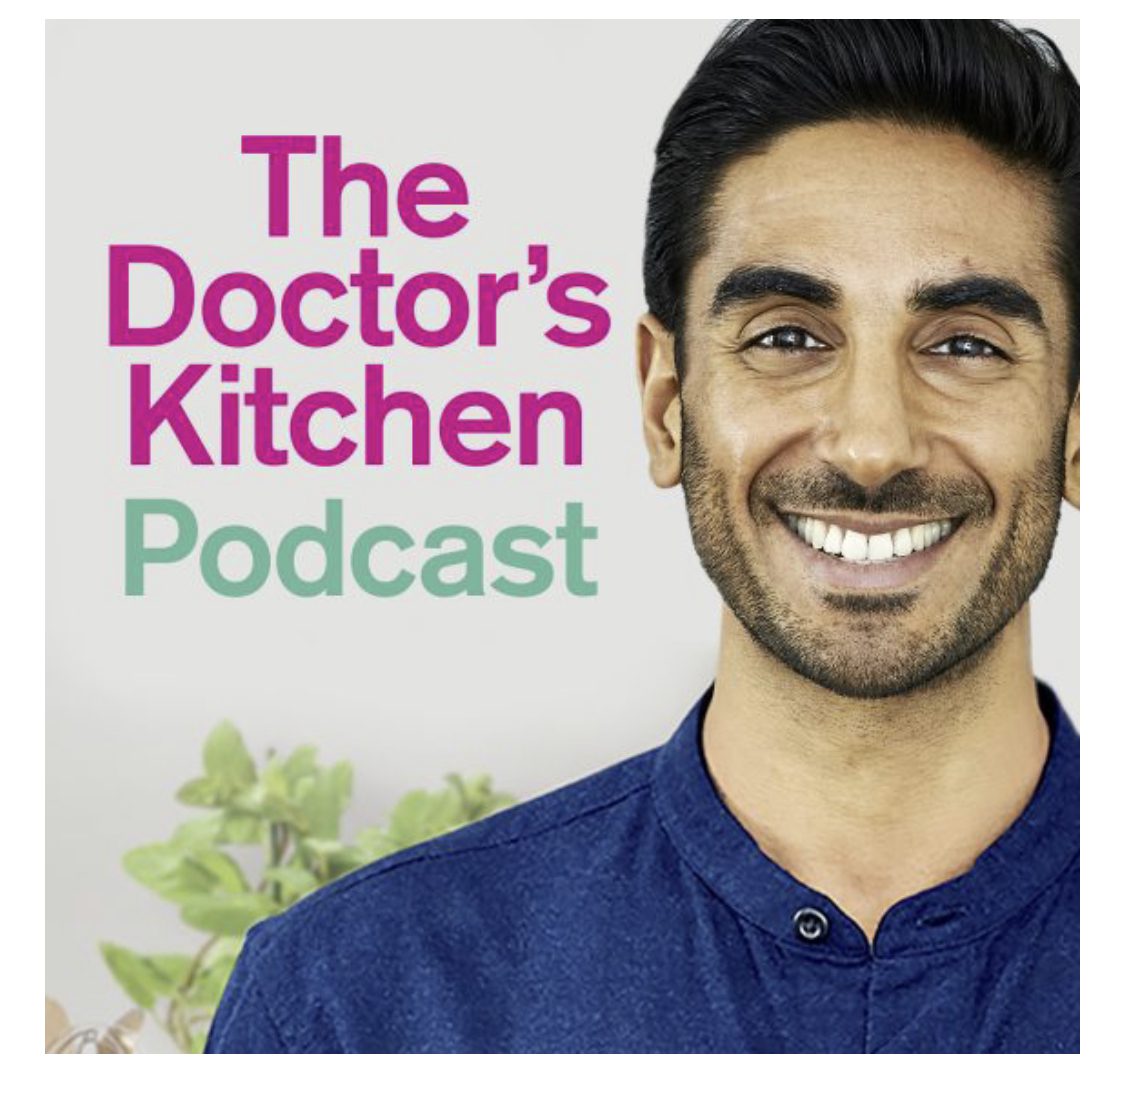 The Doctors kitchen podcast